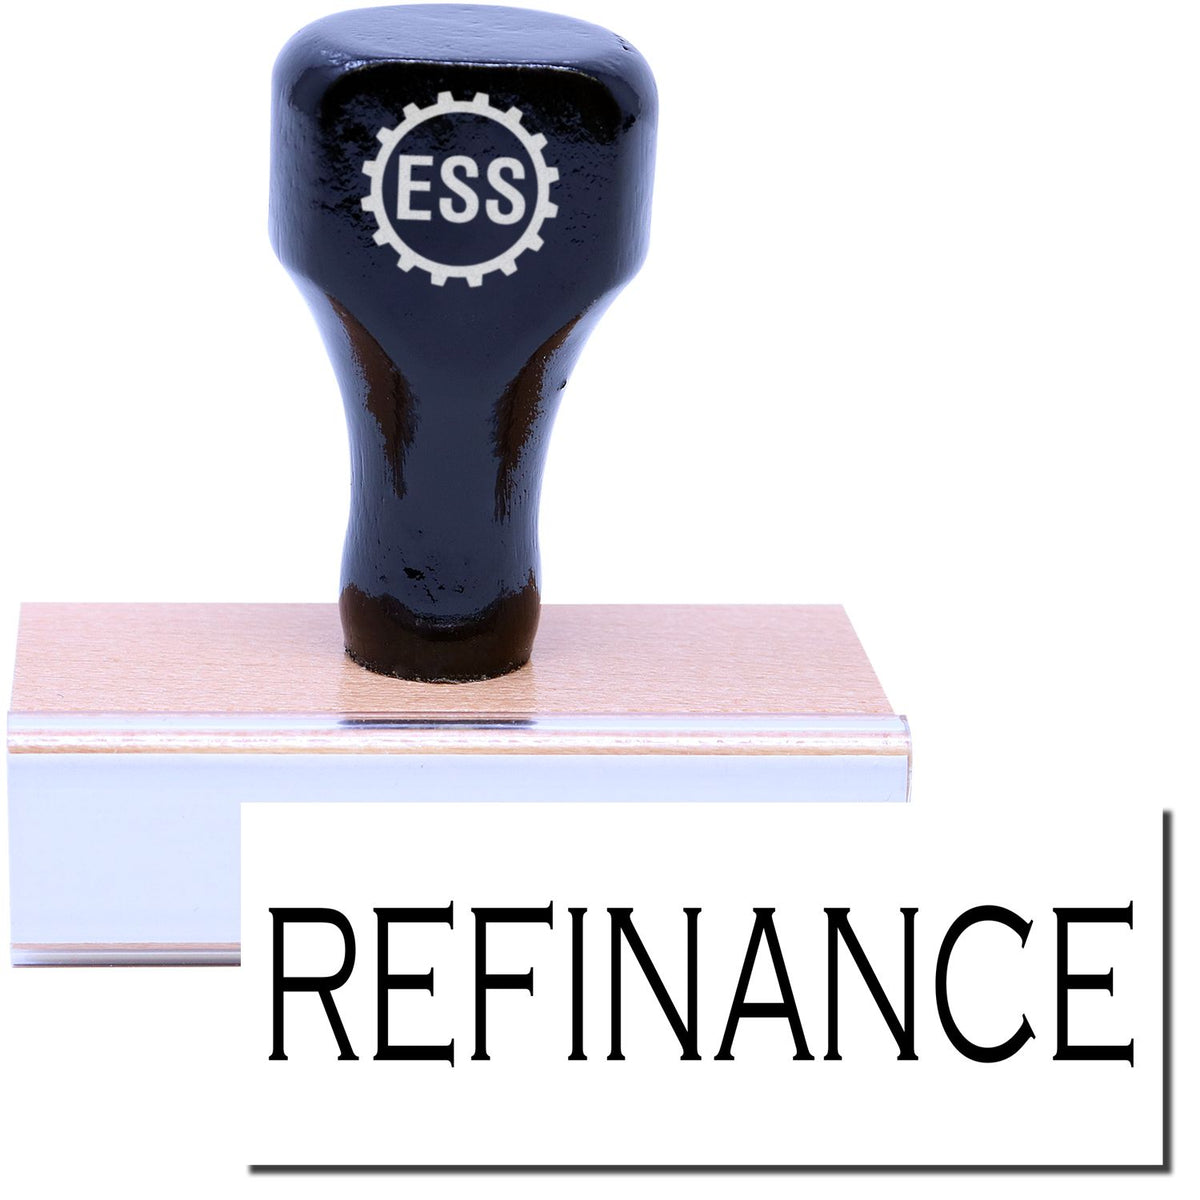 A stock office rubber stamp with a stamped image showing how the text &quot;REFINANCE&quot; is displayed after stamping.